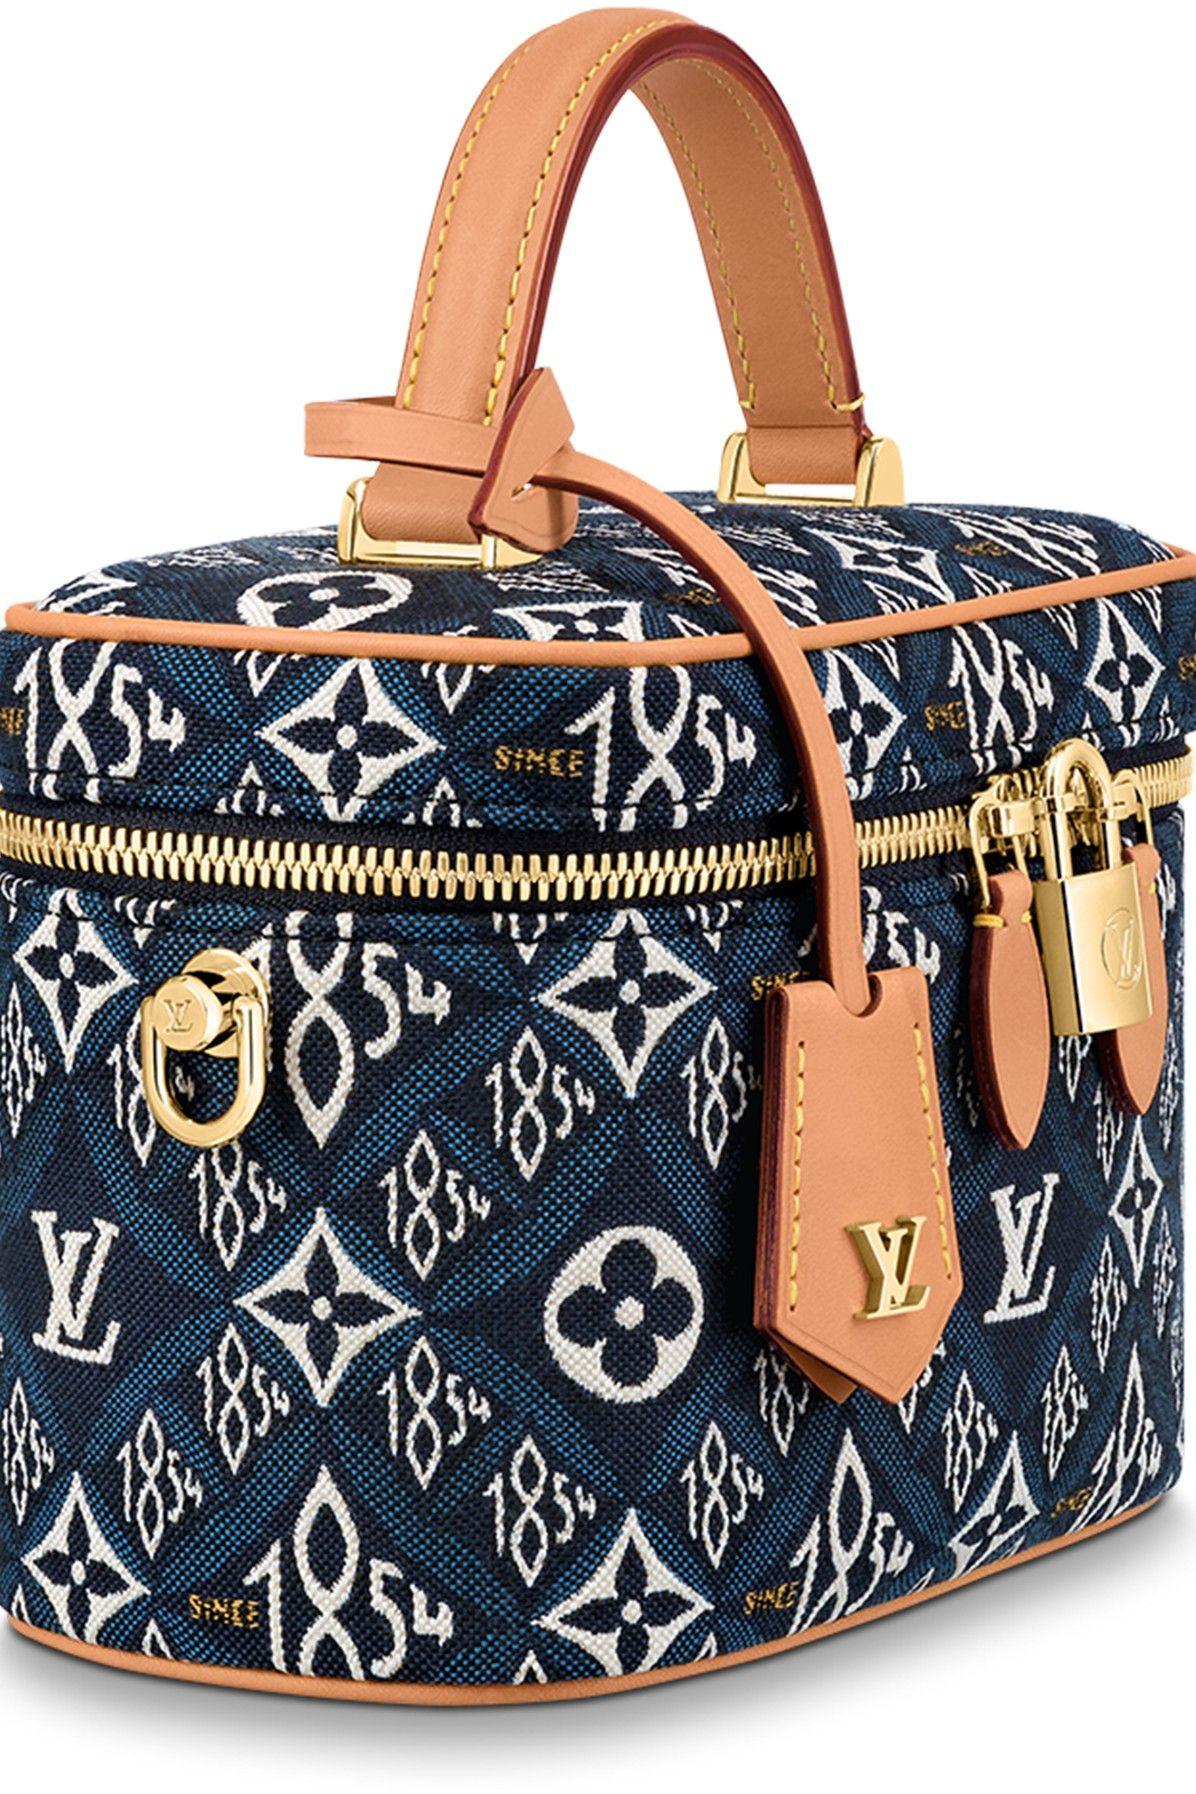 Come shop with me! Louis Vuitton's New: Since 1854 Collection